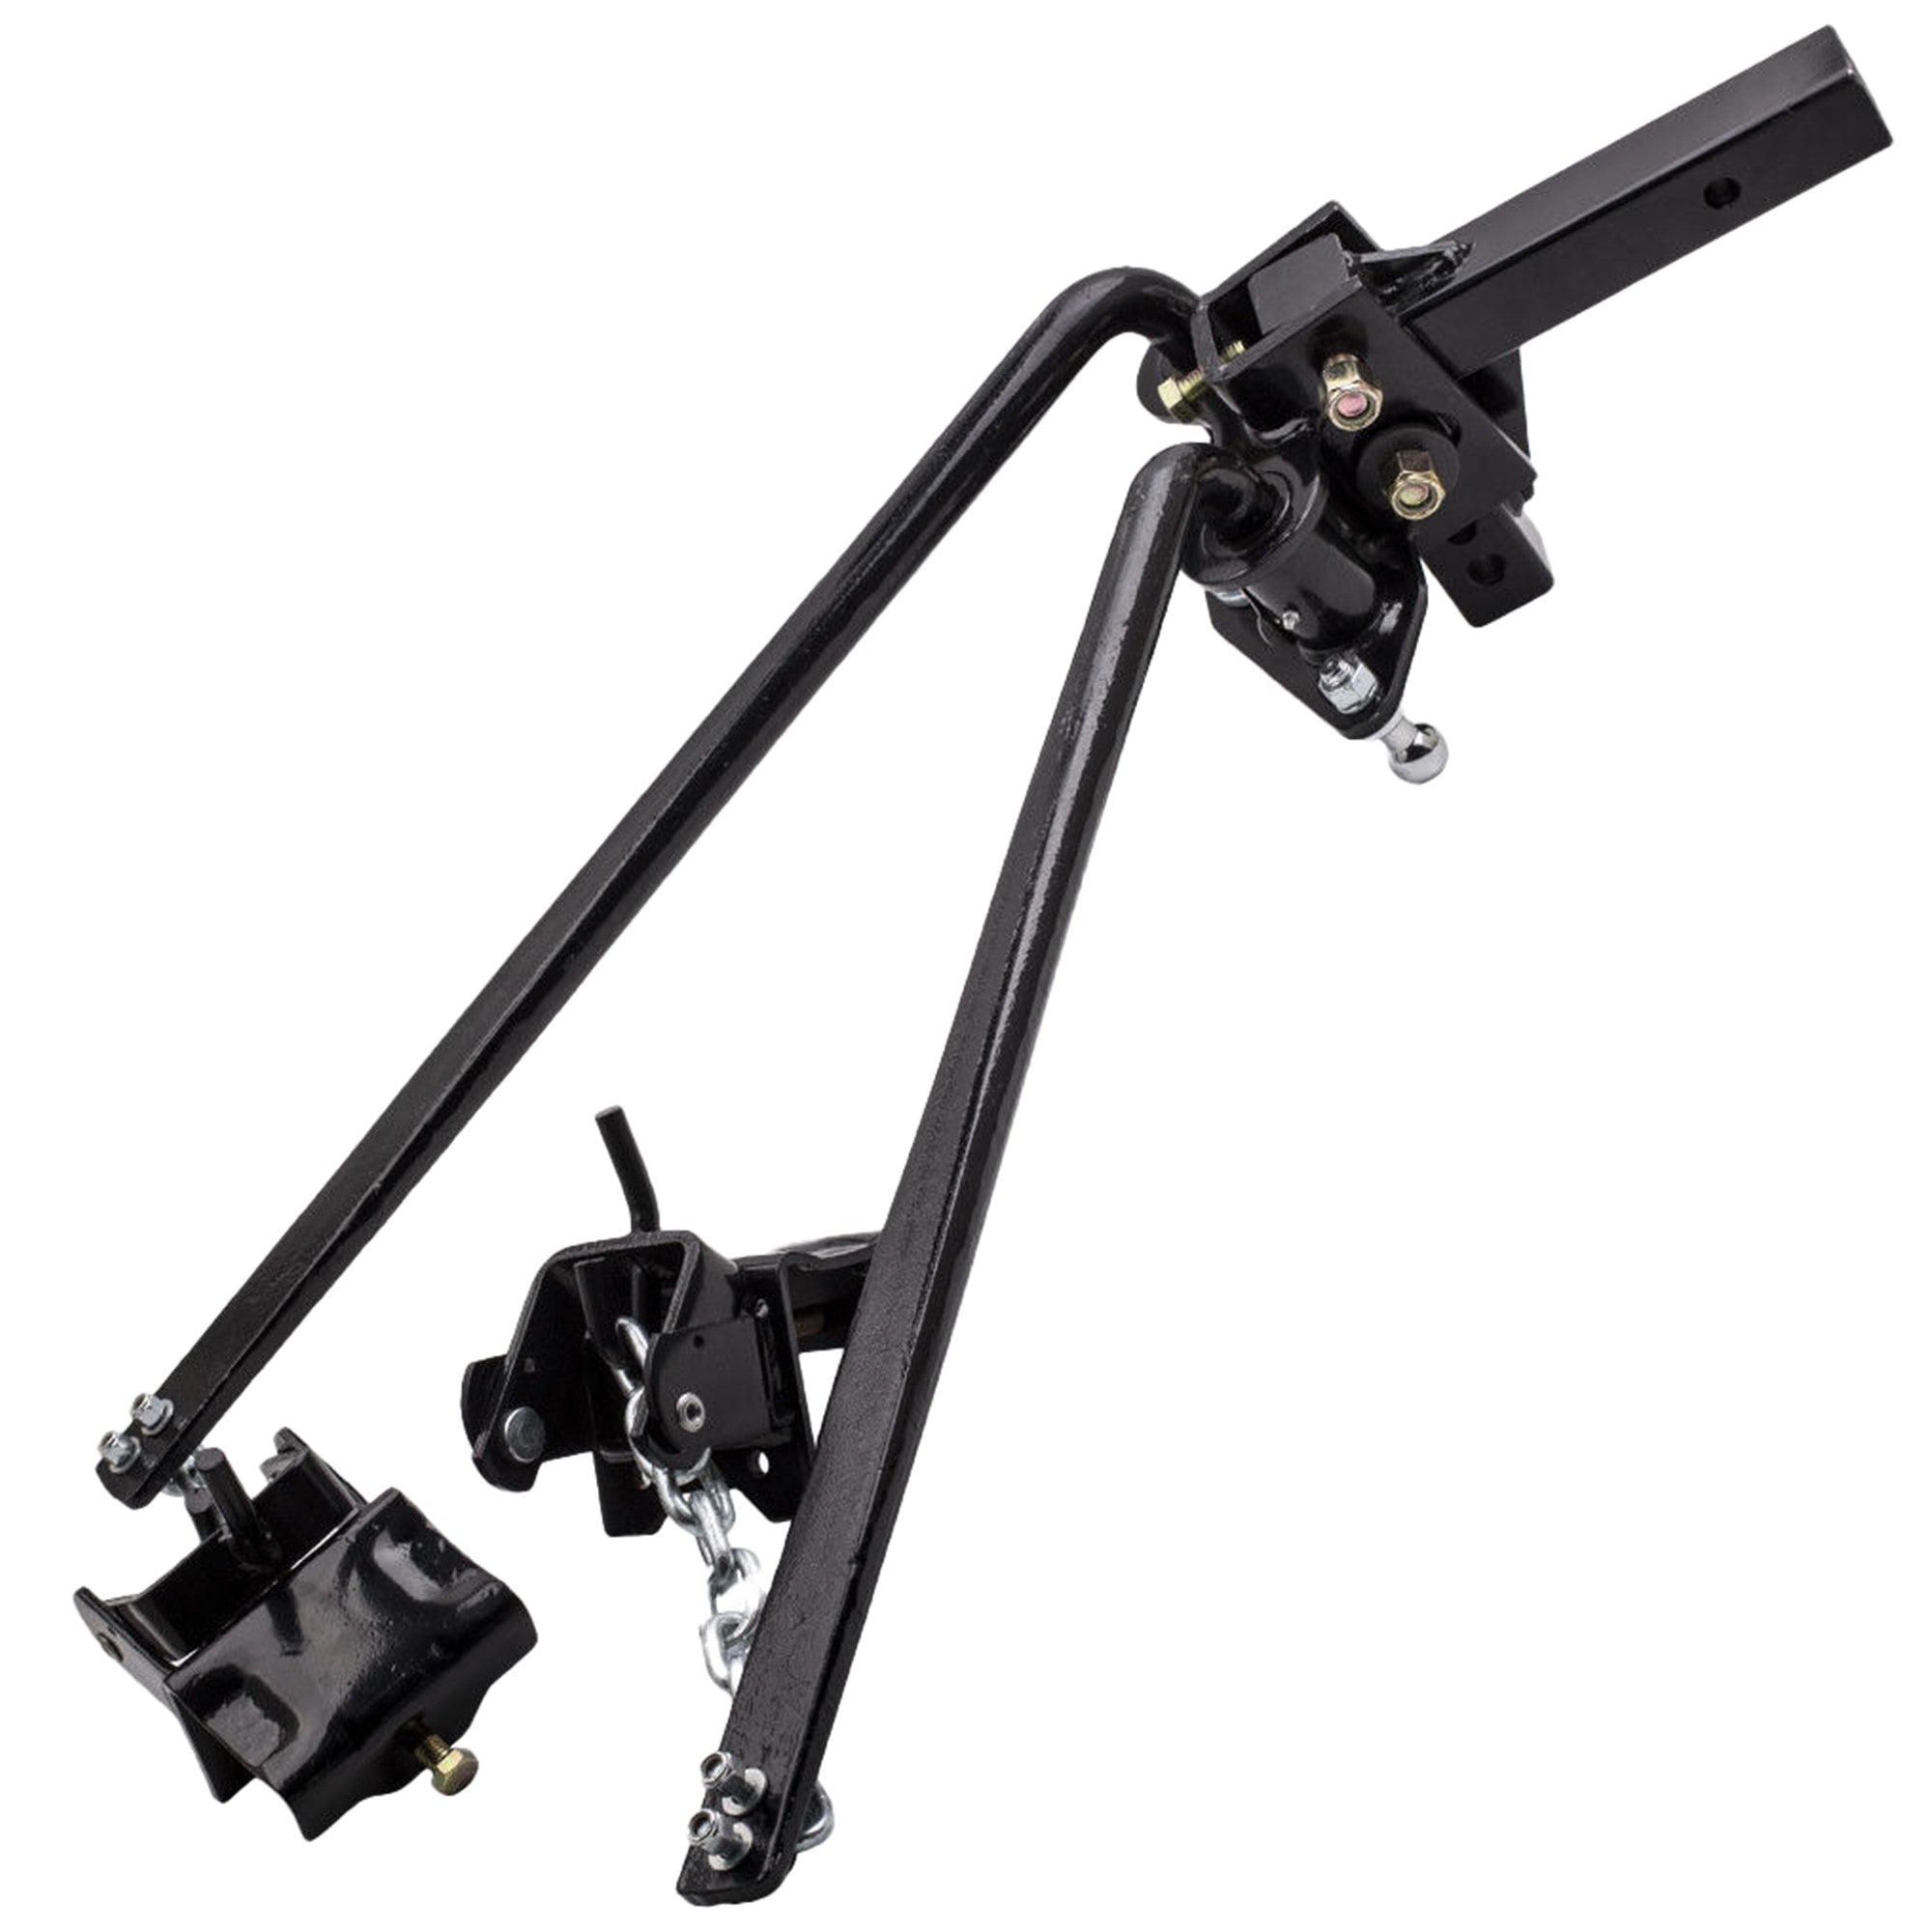 This load-leveling hitch is constructed with a formed steel head and has forged steel spring bars